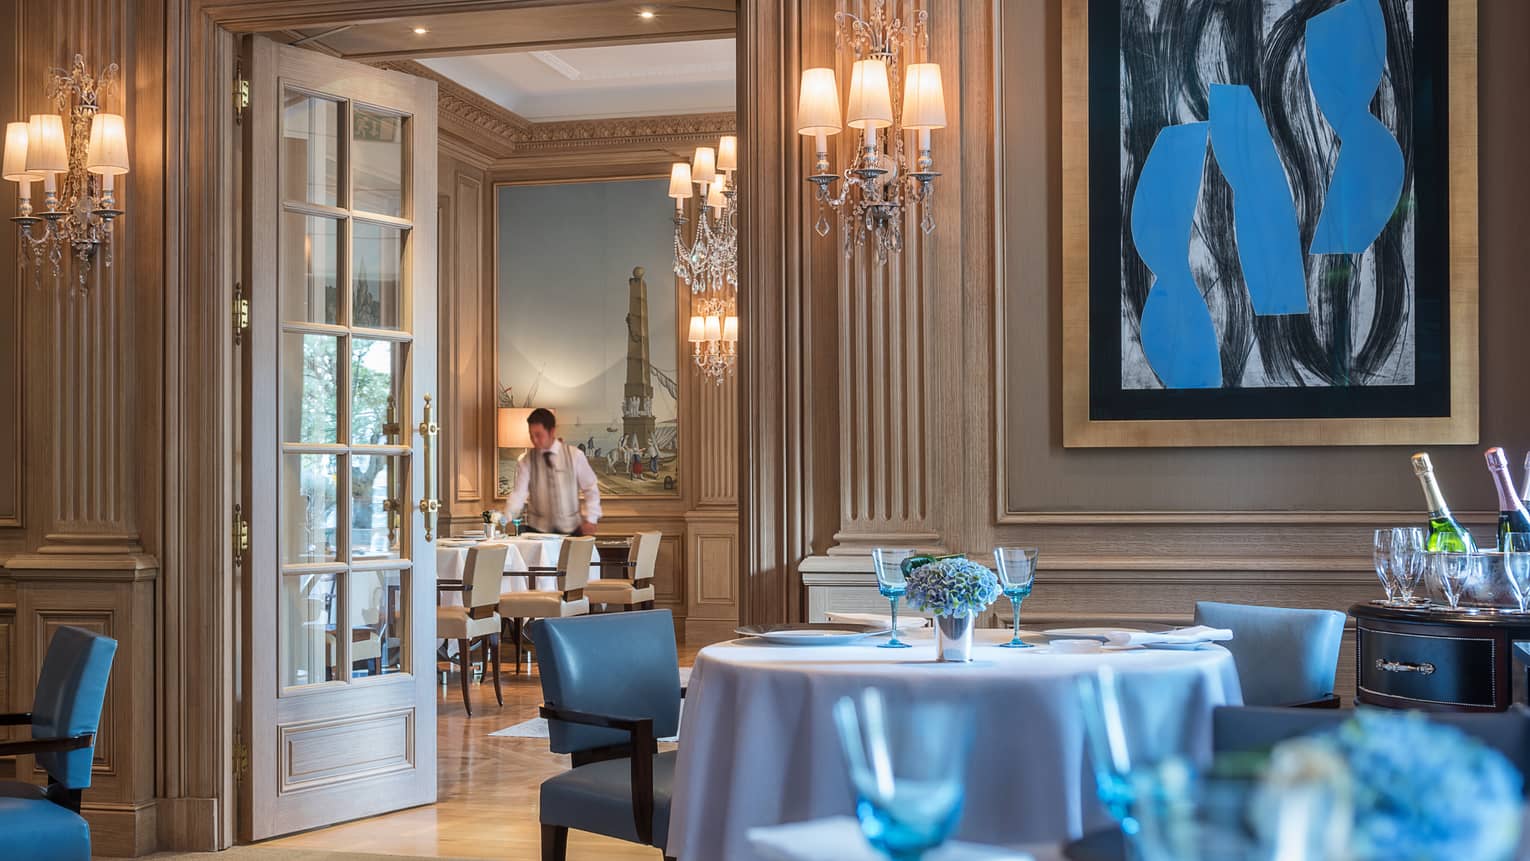 Il Lago dining room with high ceilings, cream walls and bright blue painting, chairs, glassware